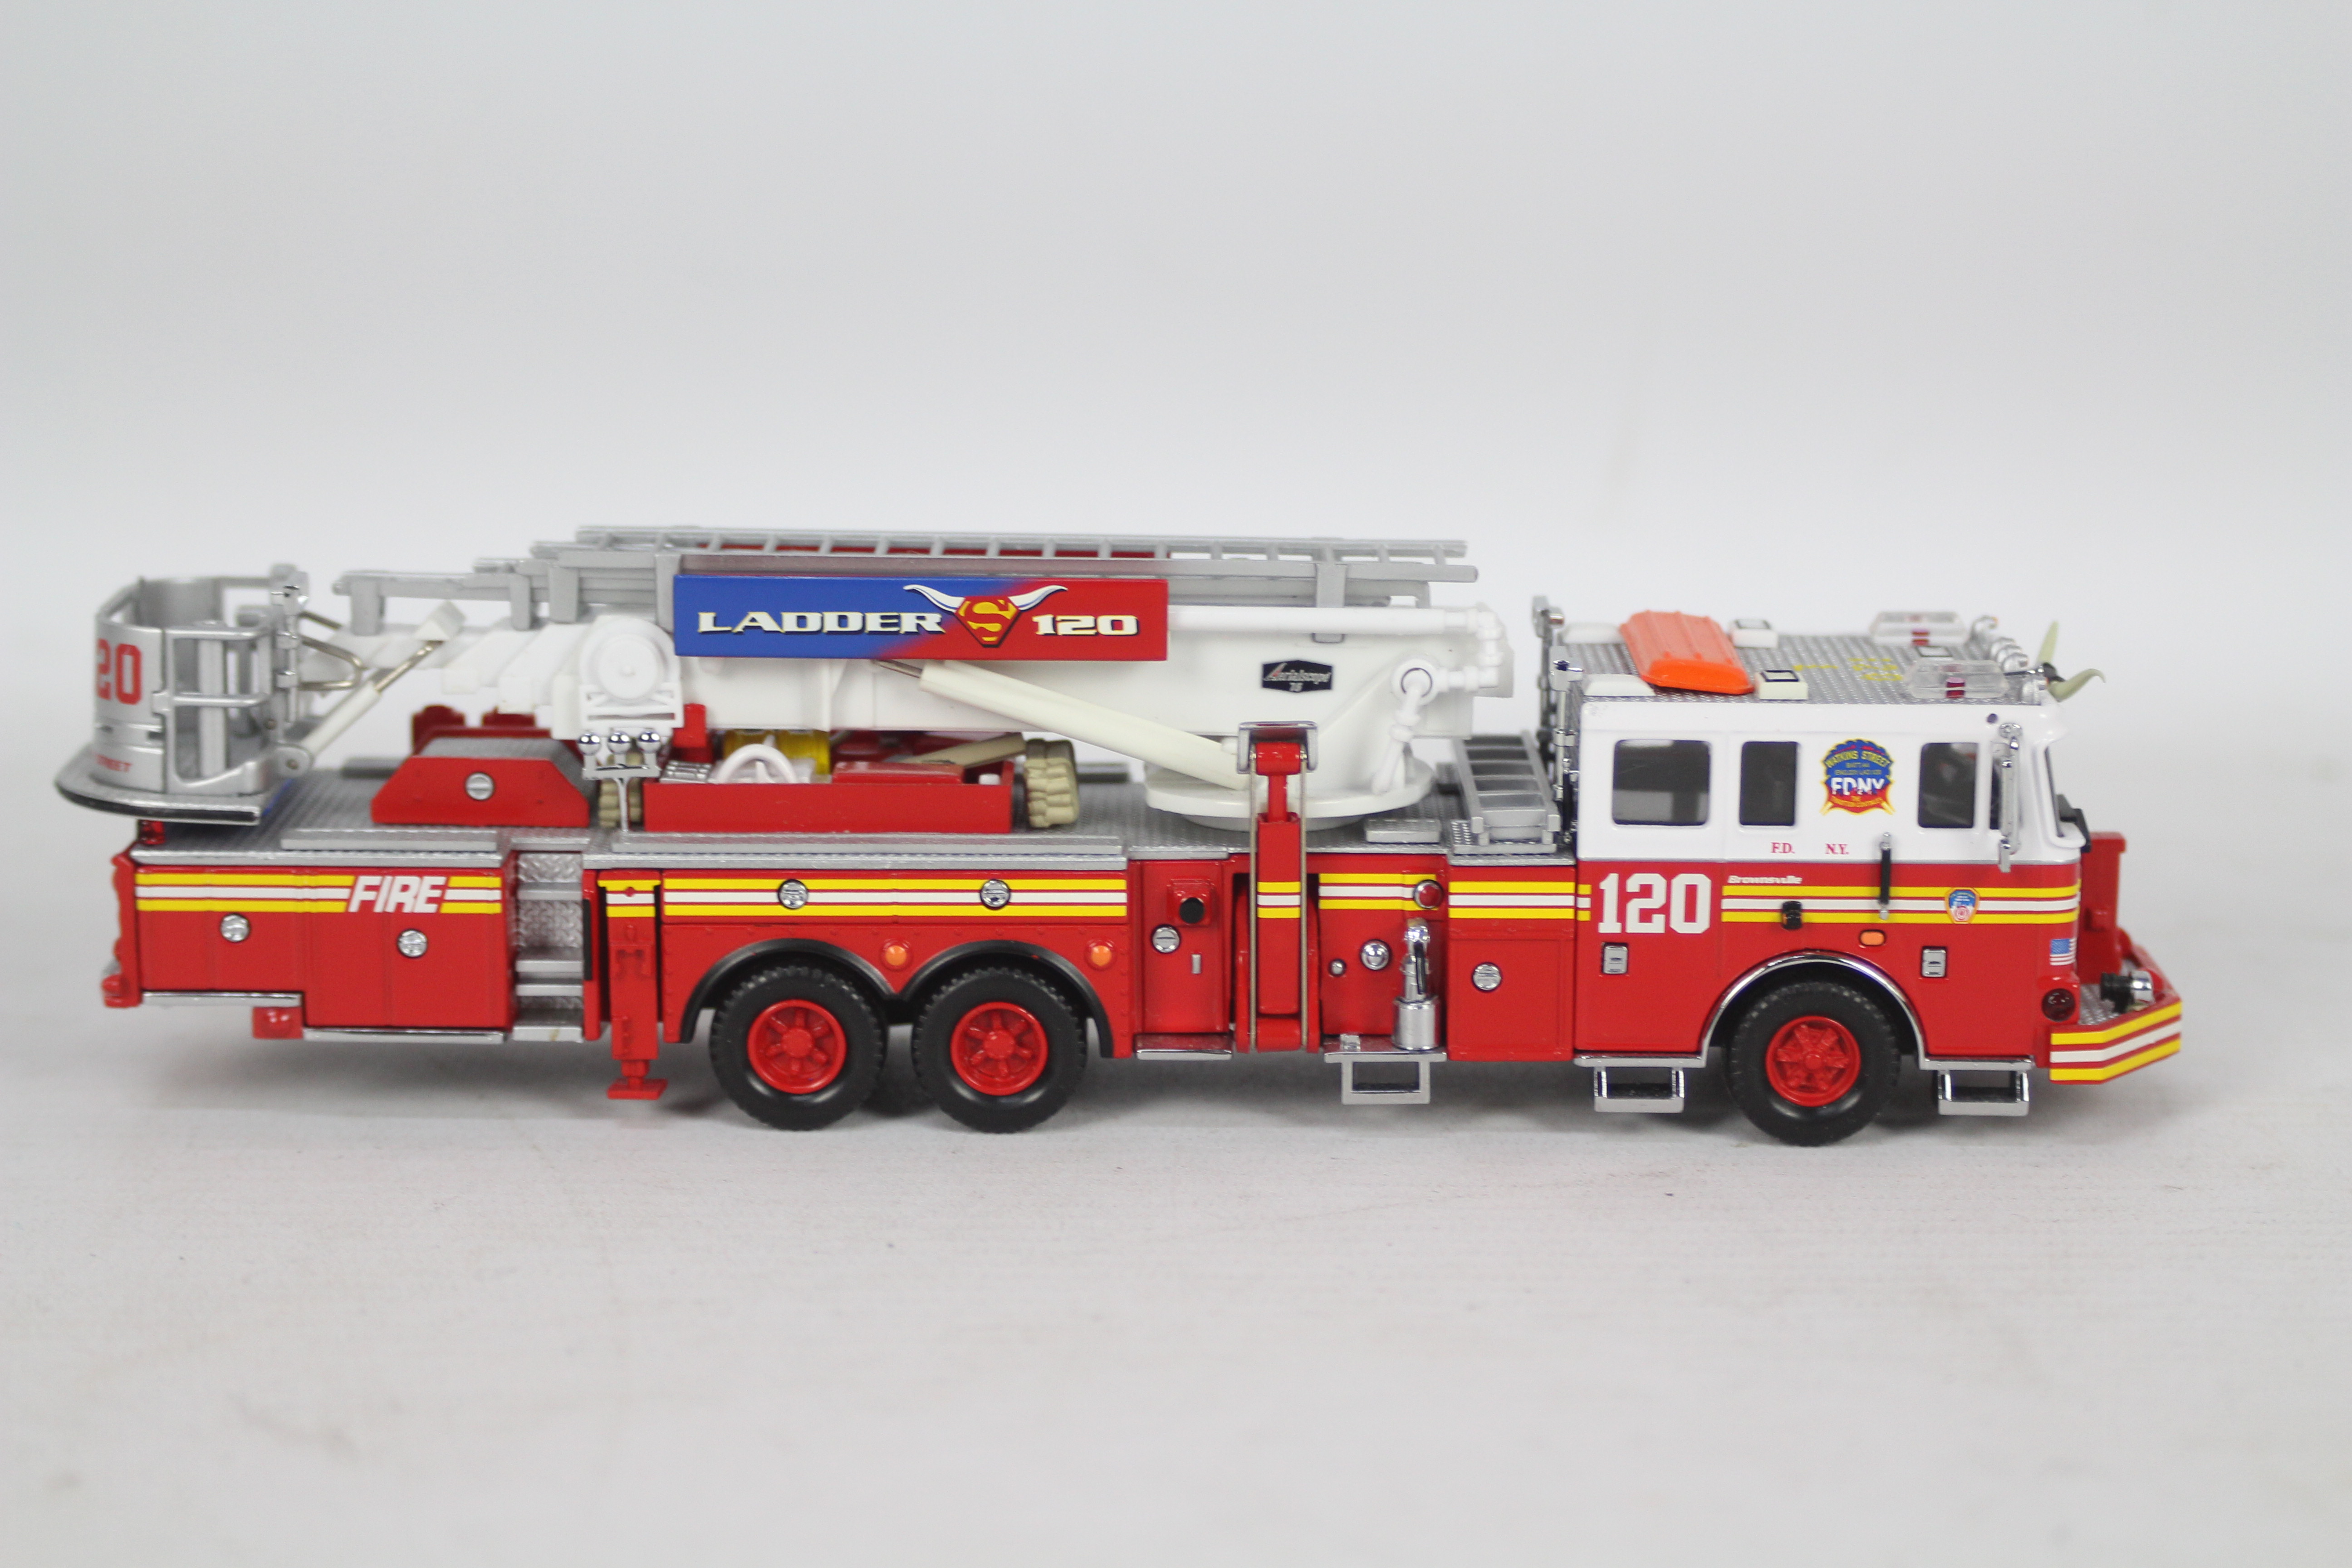 Code 3 Collectibles - An unboxed Seagrave Aerialscope Ladder 120 in FDNY livery in 1:64 scale # - Image 5 of 5